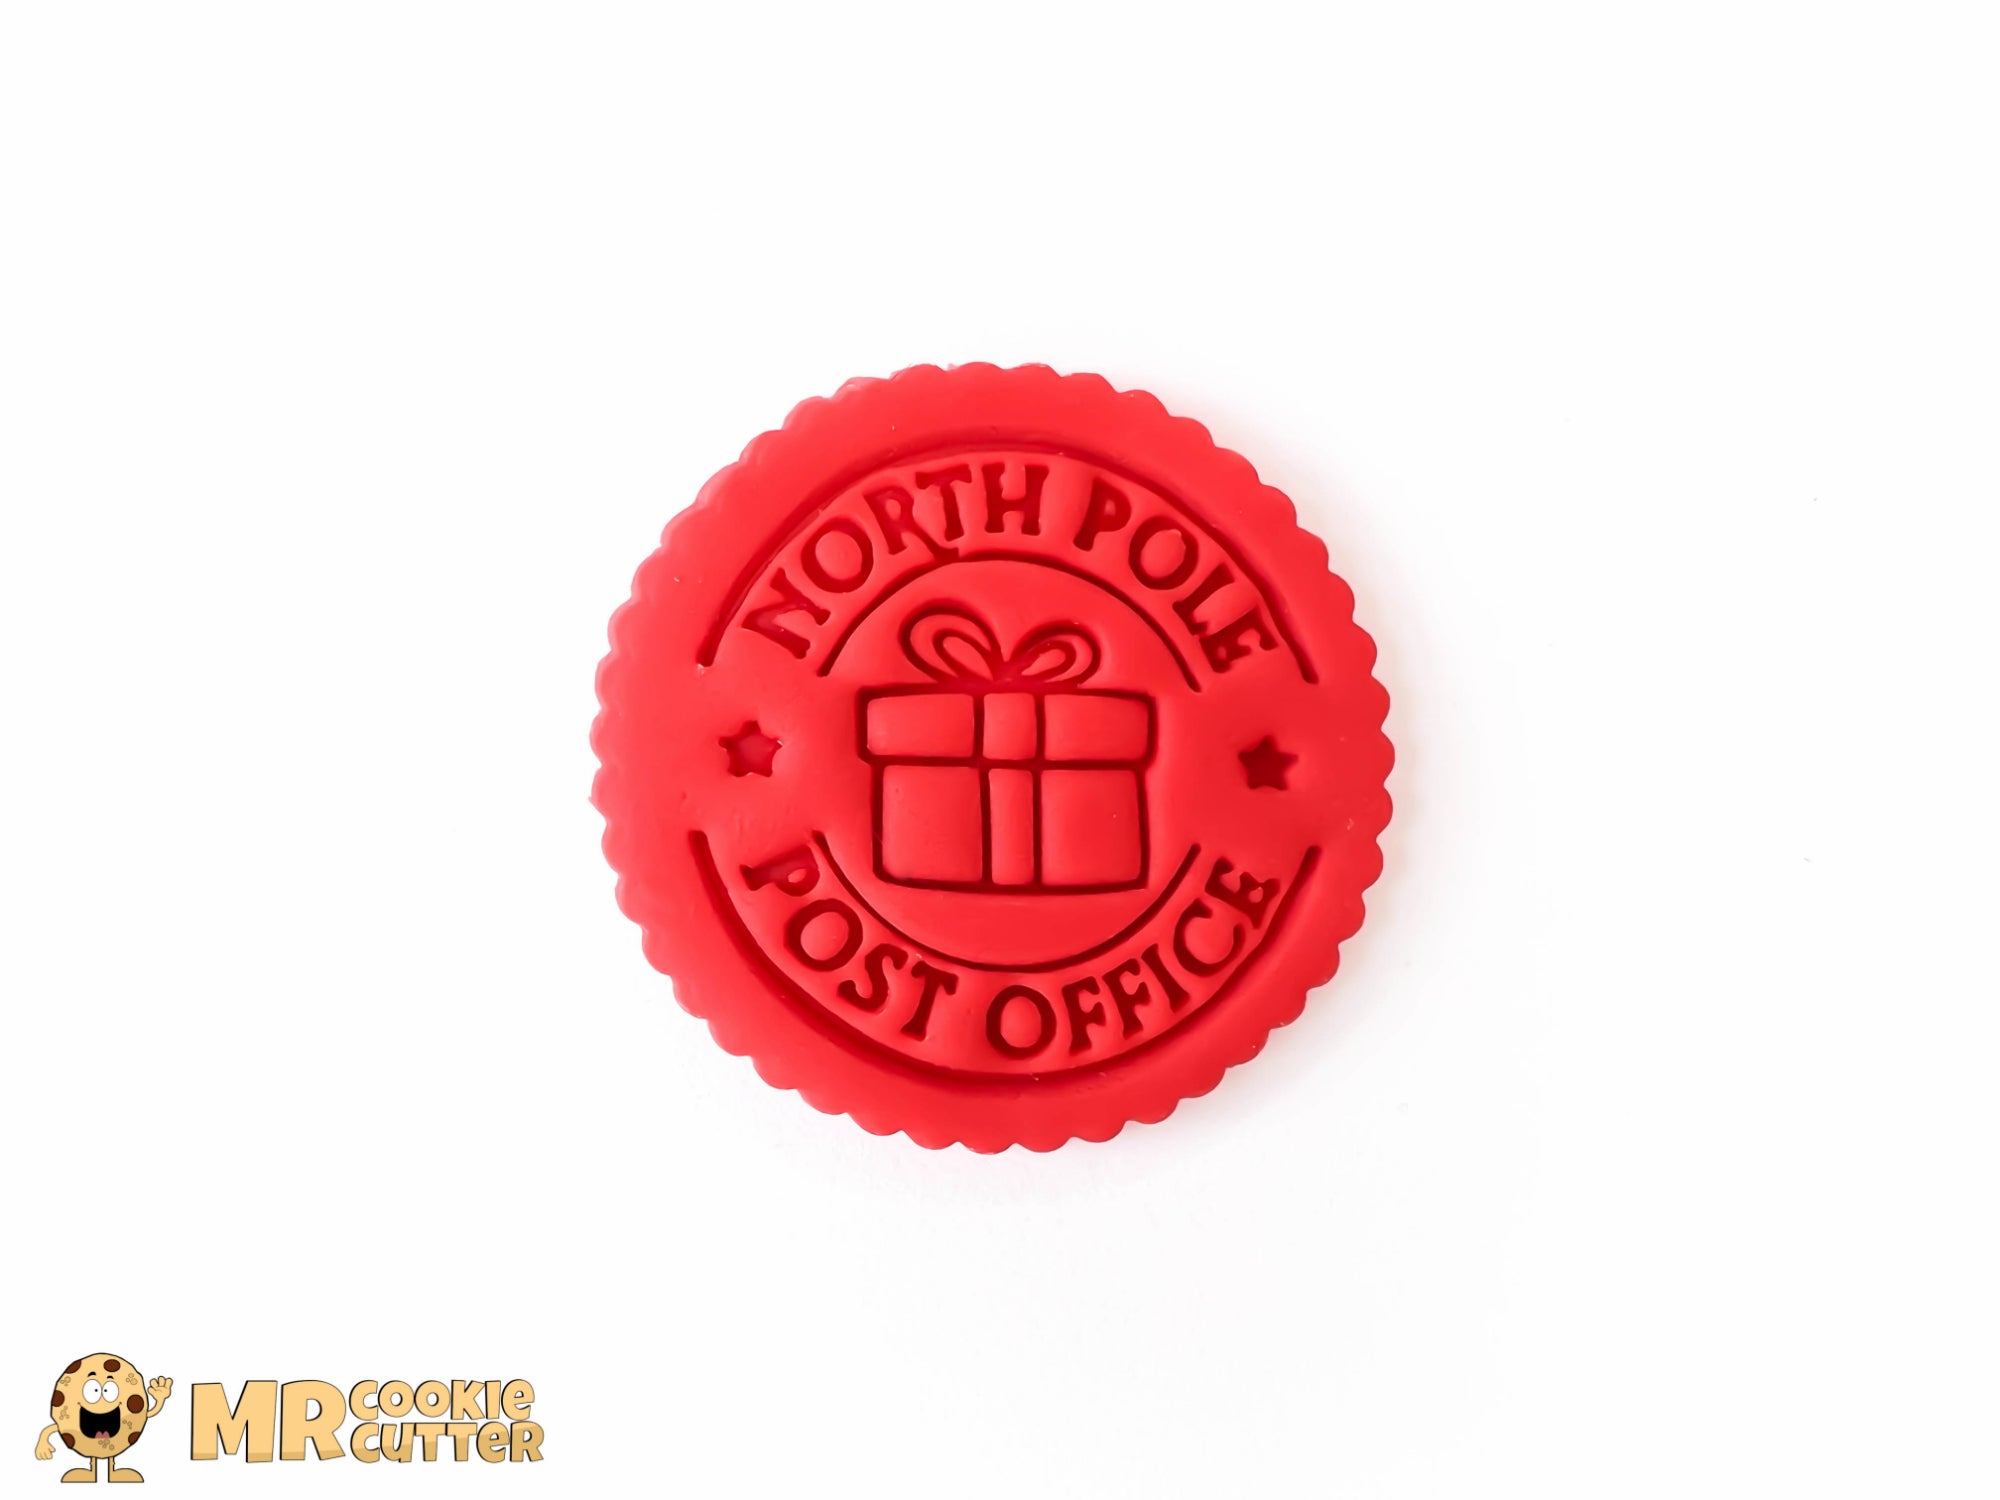 North Pole Post Office Parcel Cupcake Topper